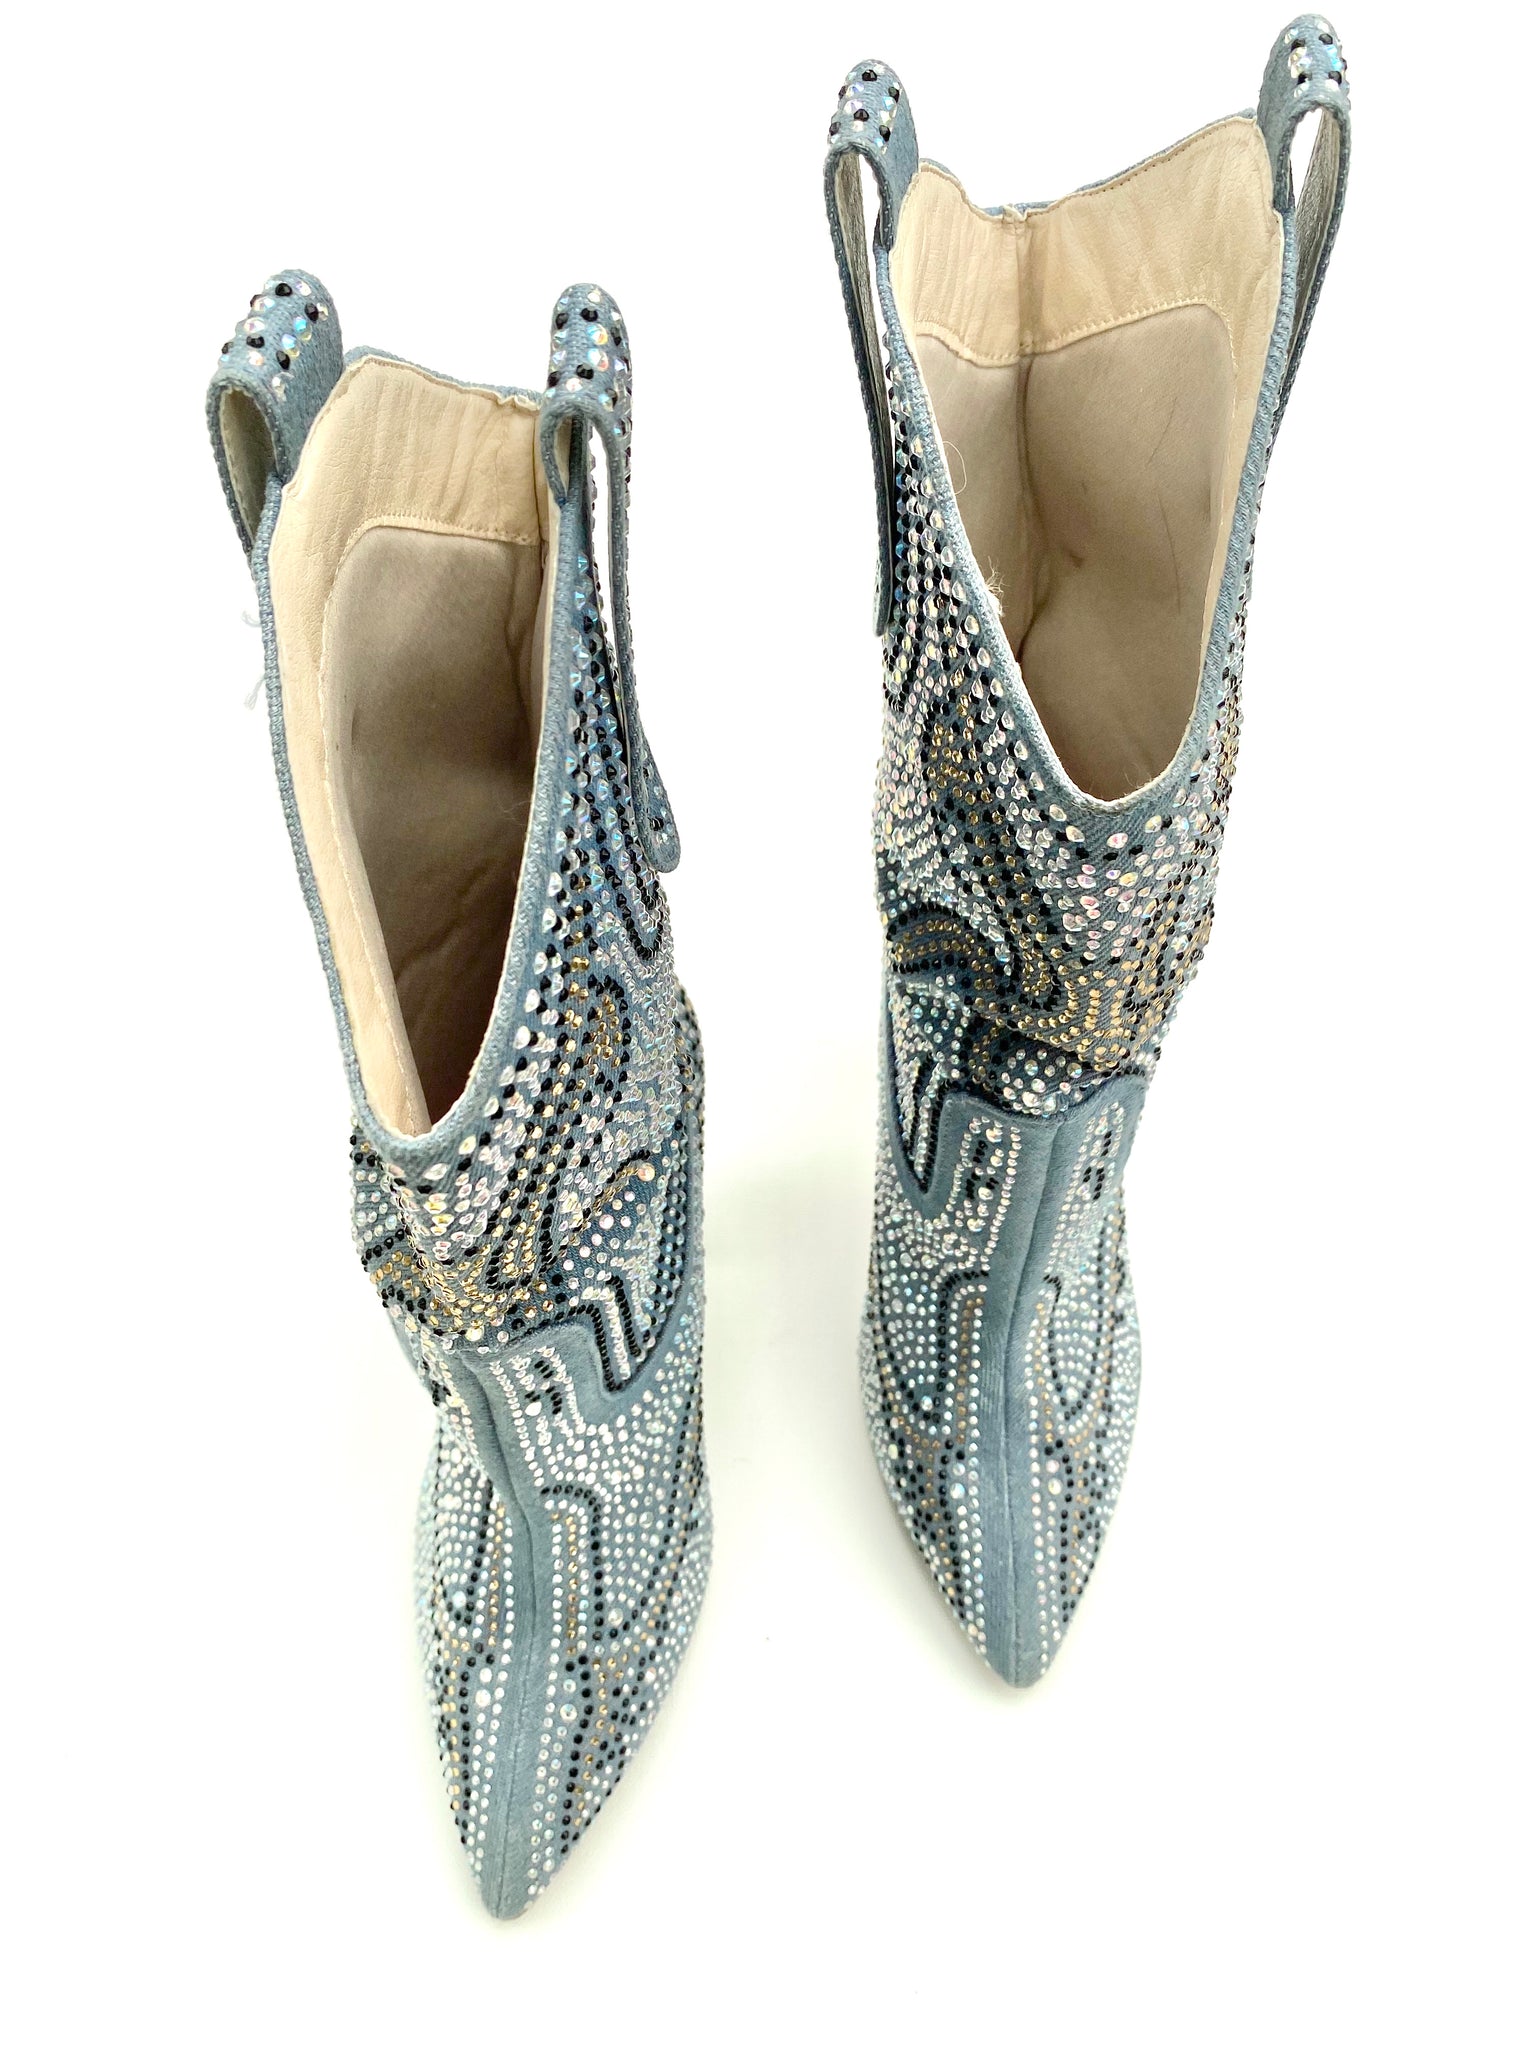 VINTAGE: Western Boots - Bedazzled Blue